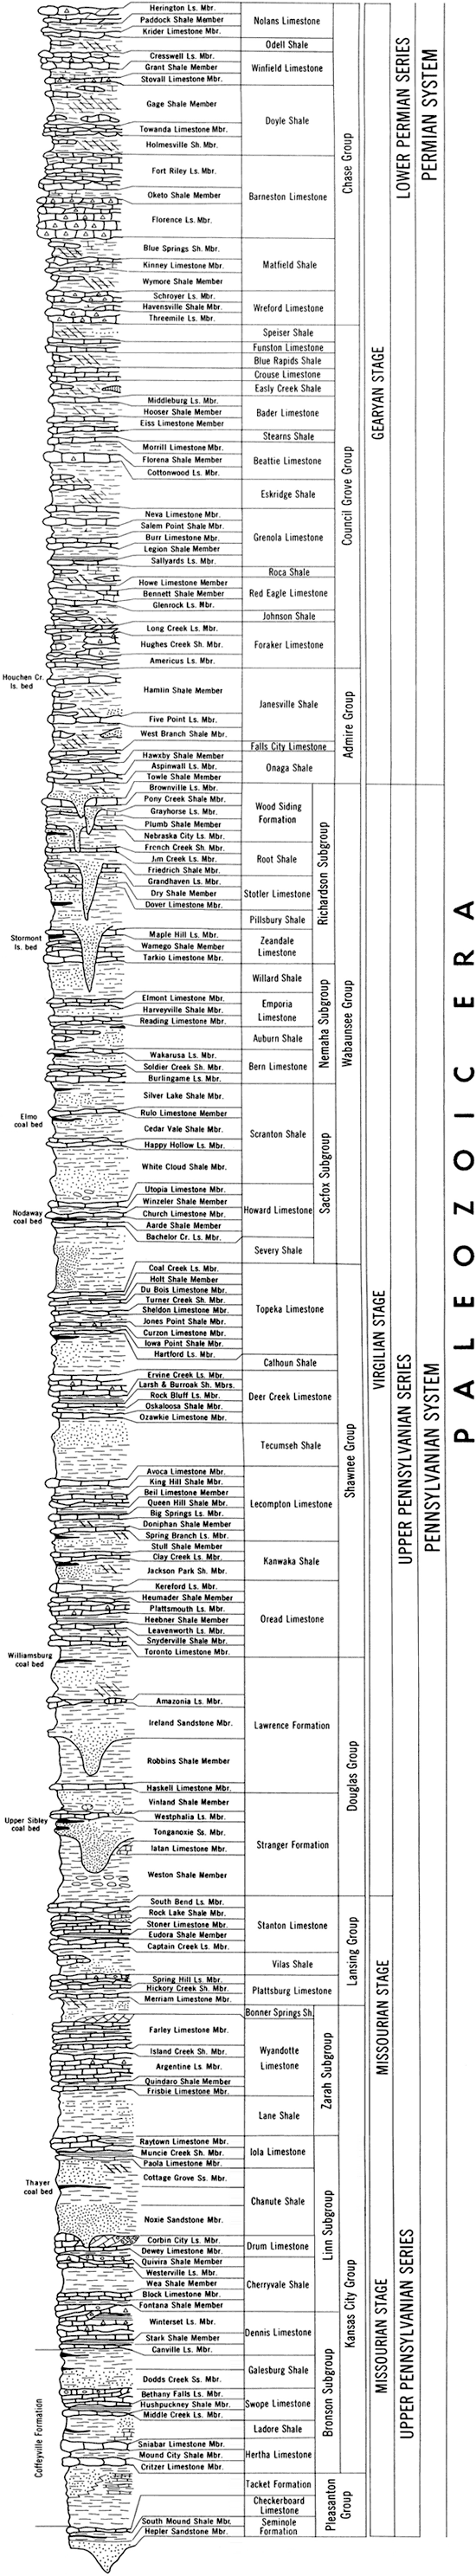 Stratigraphic chart from Chase Group at top to Pleasanton Group at bottom.